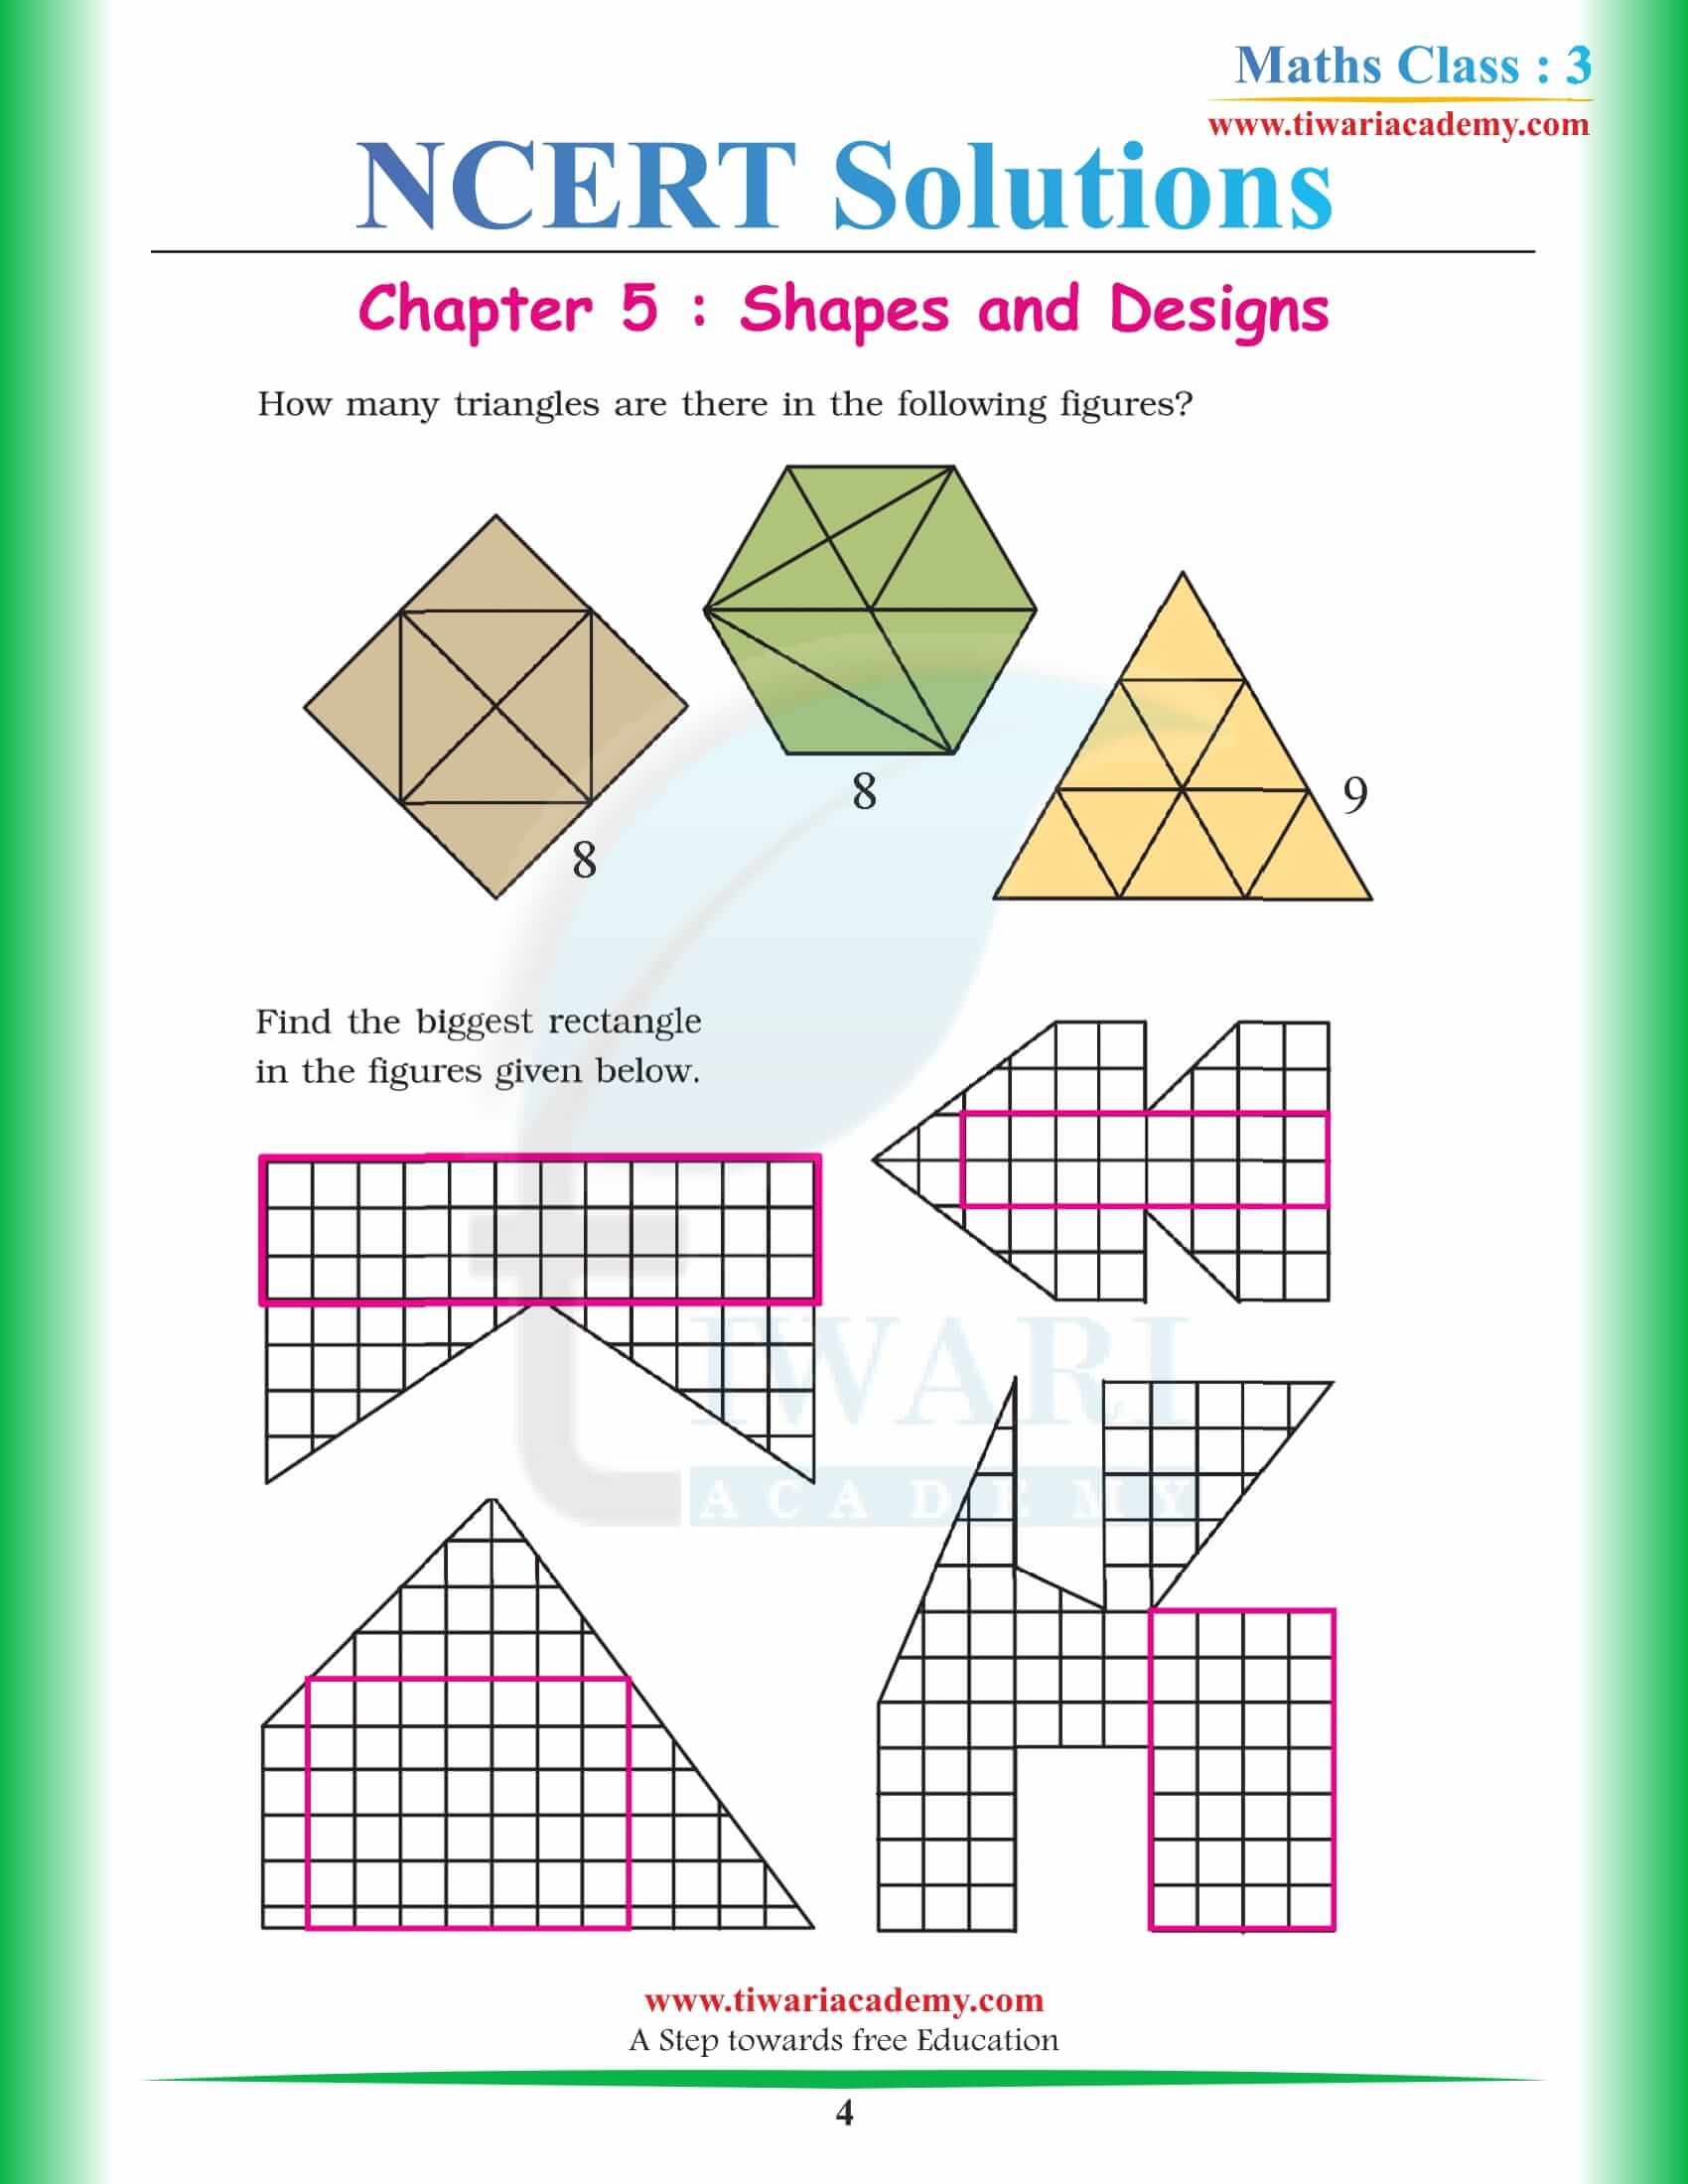 NCERT Solutions for Class 3 Maths Chapter 5 in PDF free